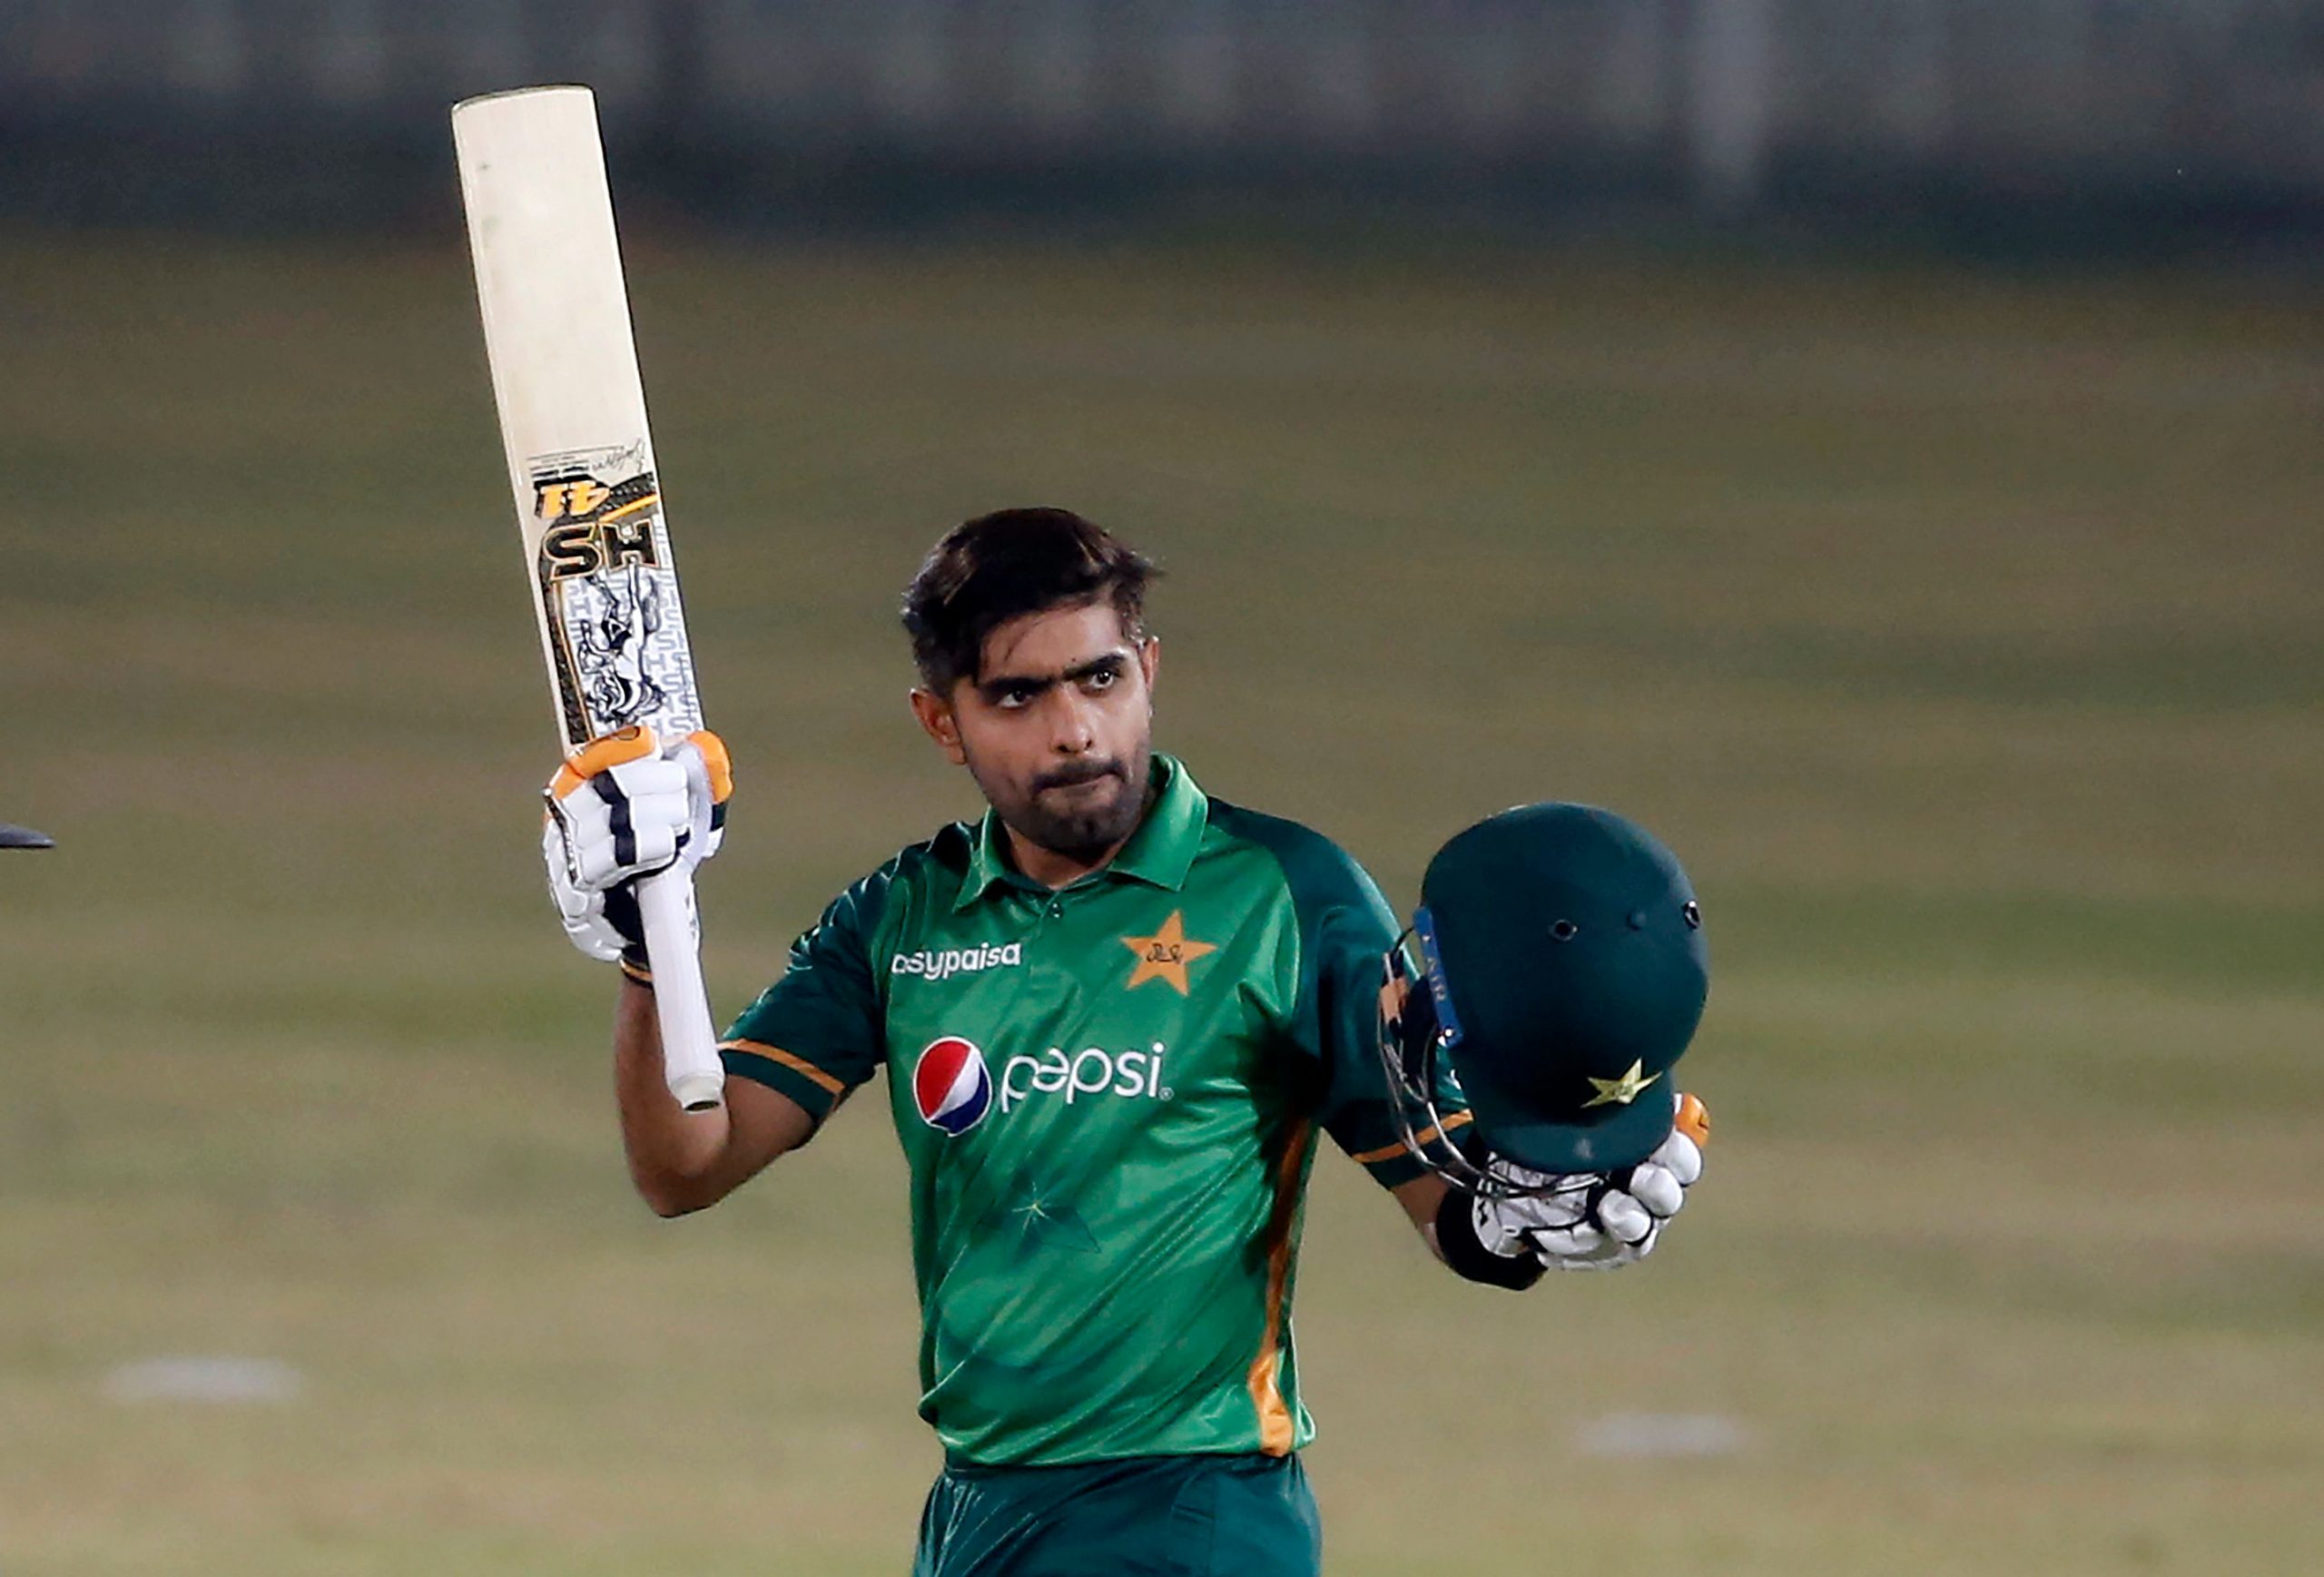 Pakistan’s Babar Azam cleared but not confirmed for second Test against New Zealand